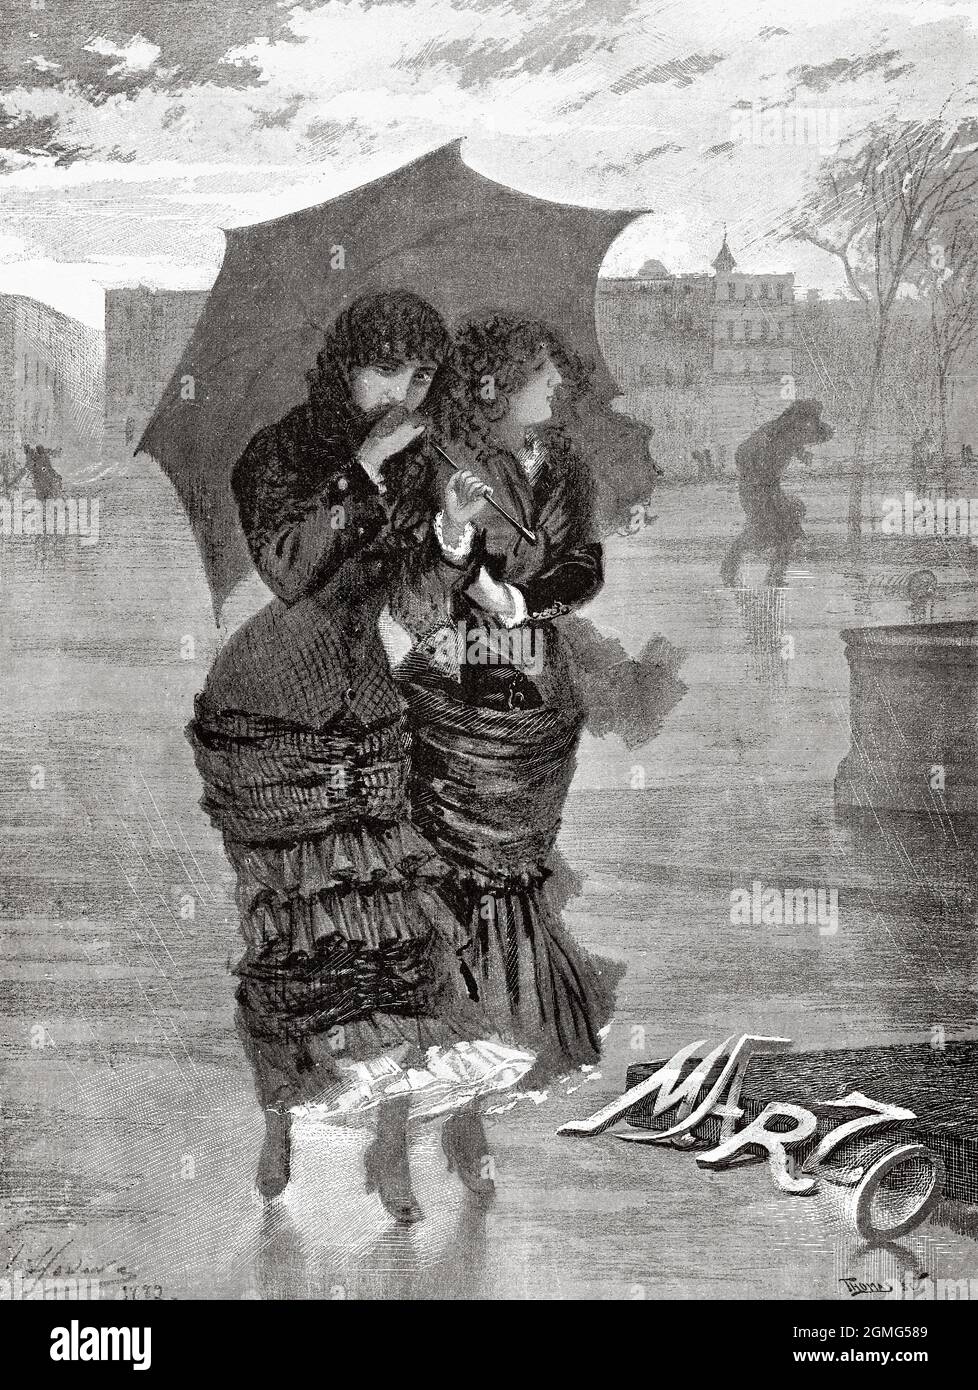 Allegory of the month of March, two women walking in the rain with an umbrella by Josep Llovera i Bufill (1846-1896) was a Catalan painter and newspaper illustrator. Old 19th century engraved illustration from La Ilustración Artística 1882 Stock Photo